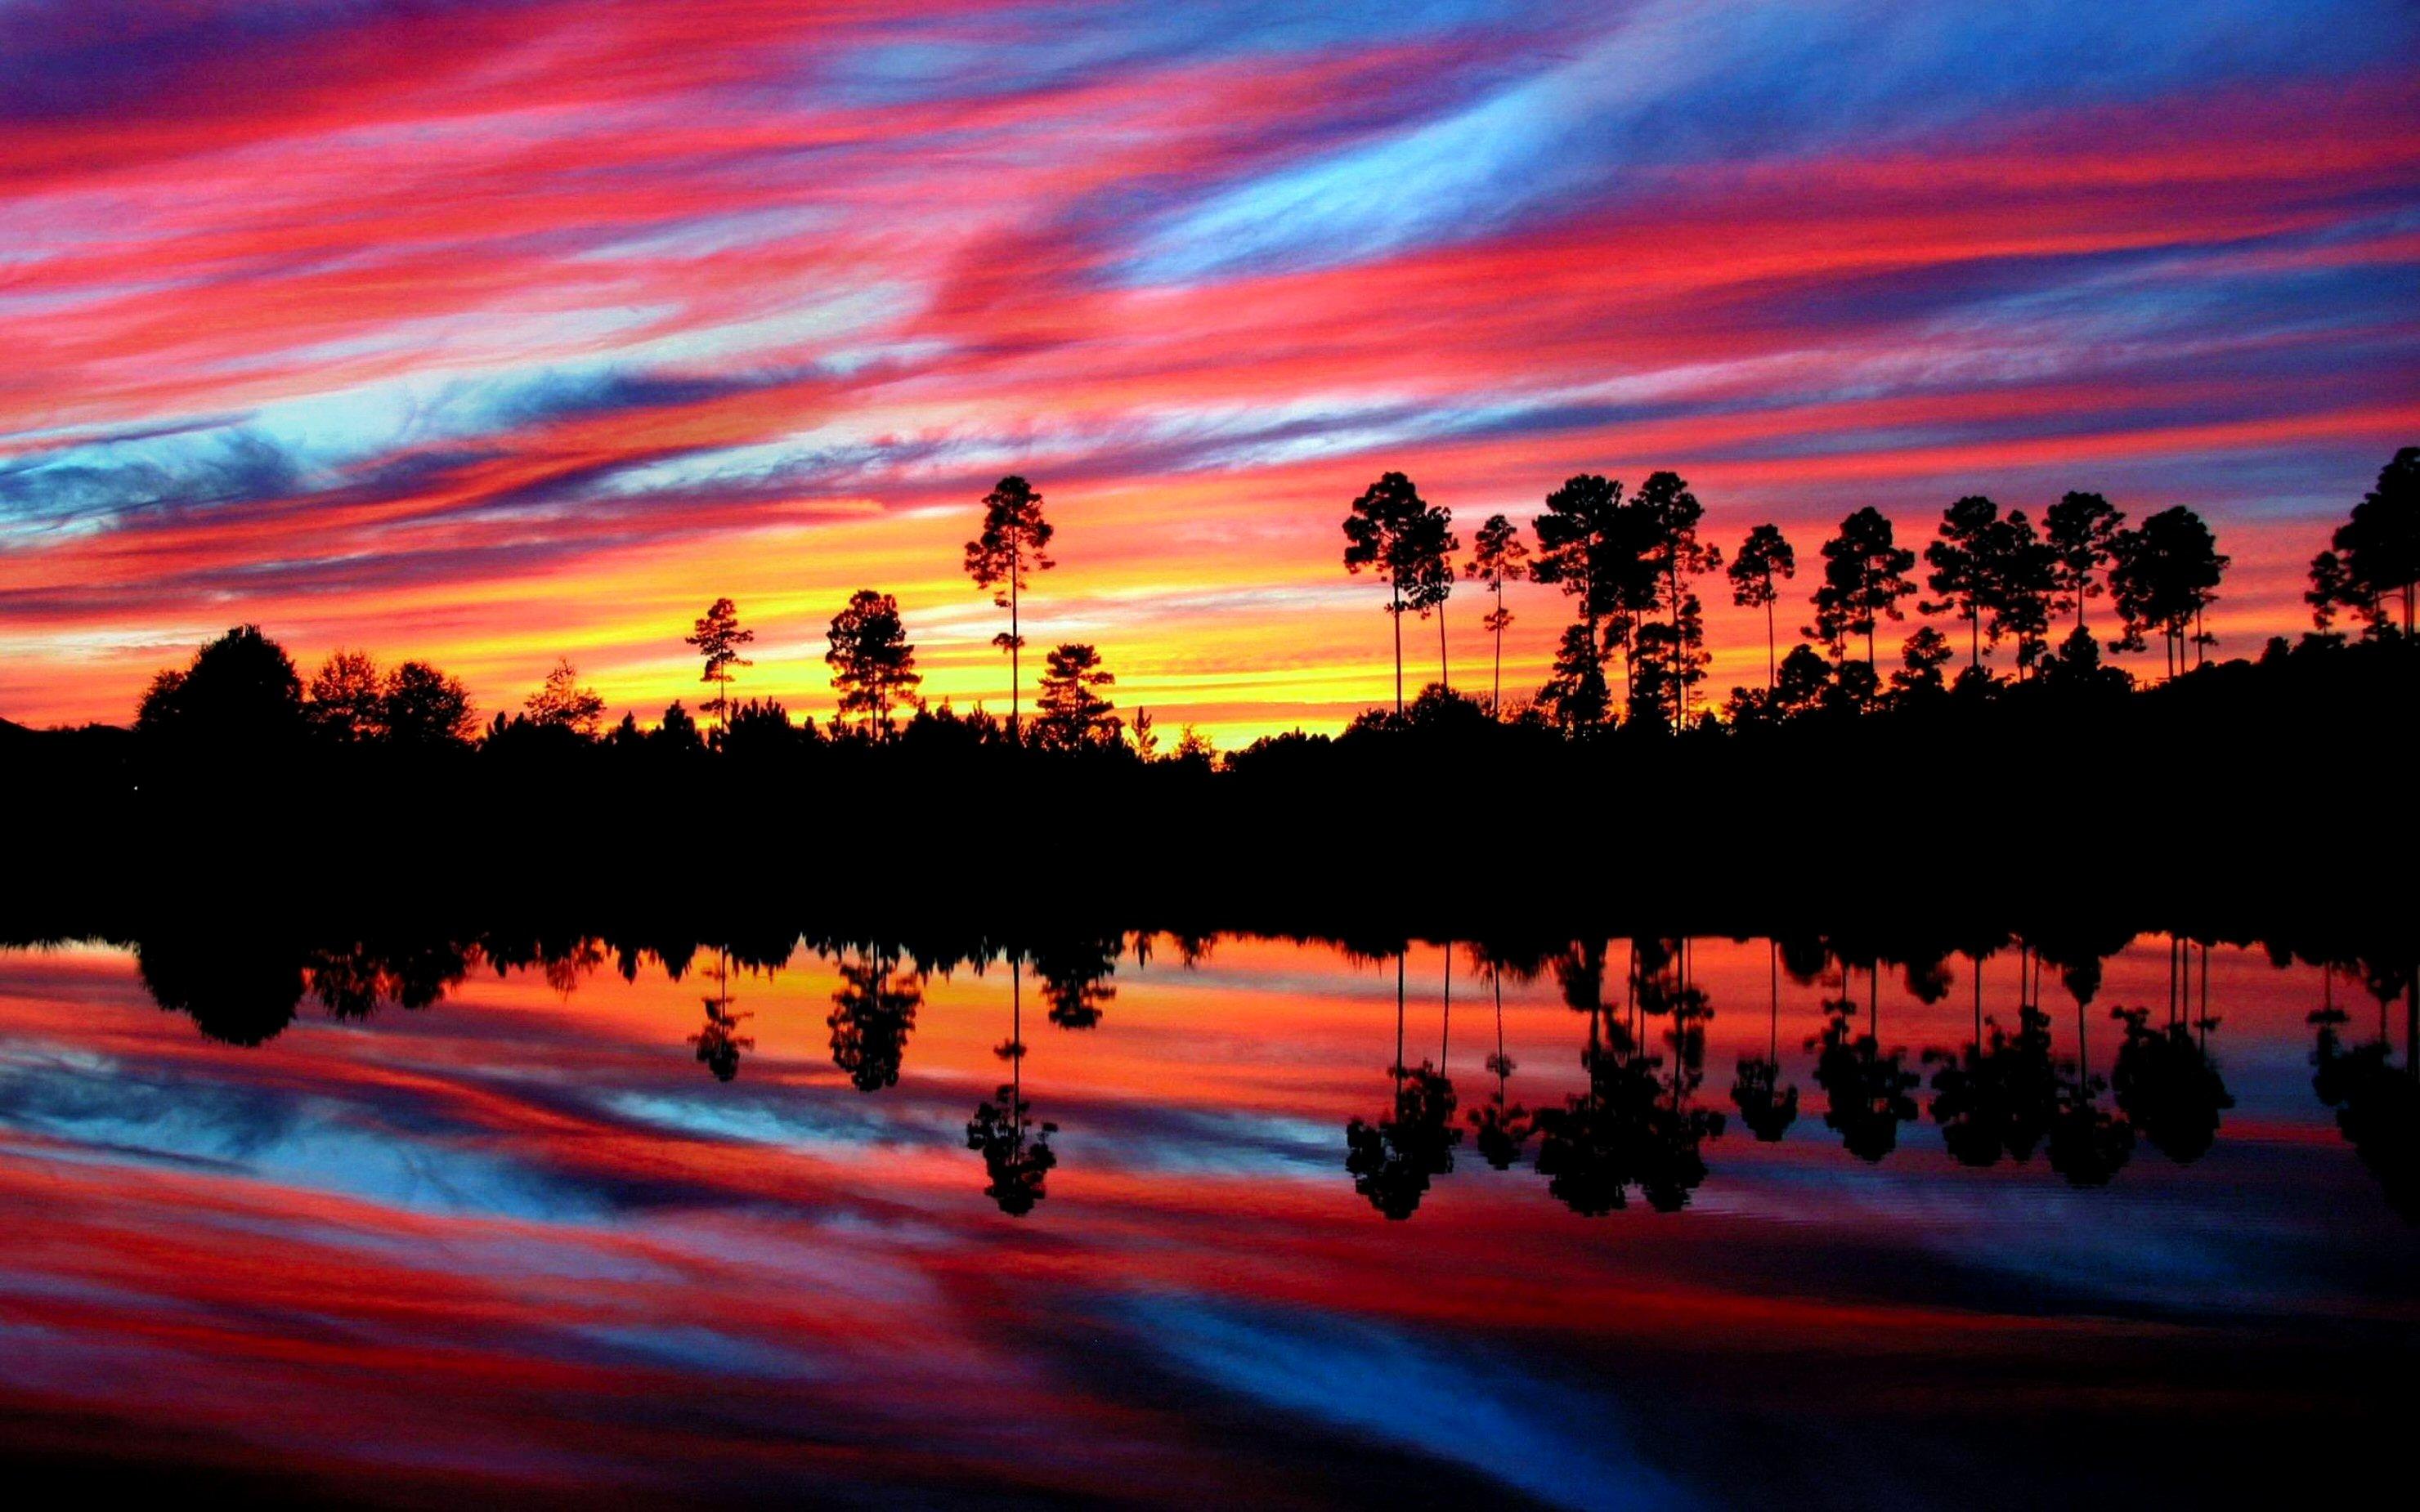 A sunset over the water with trees in it - Florida, sunrise